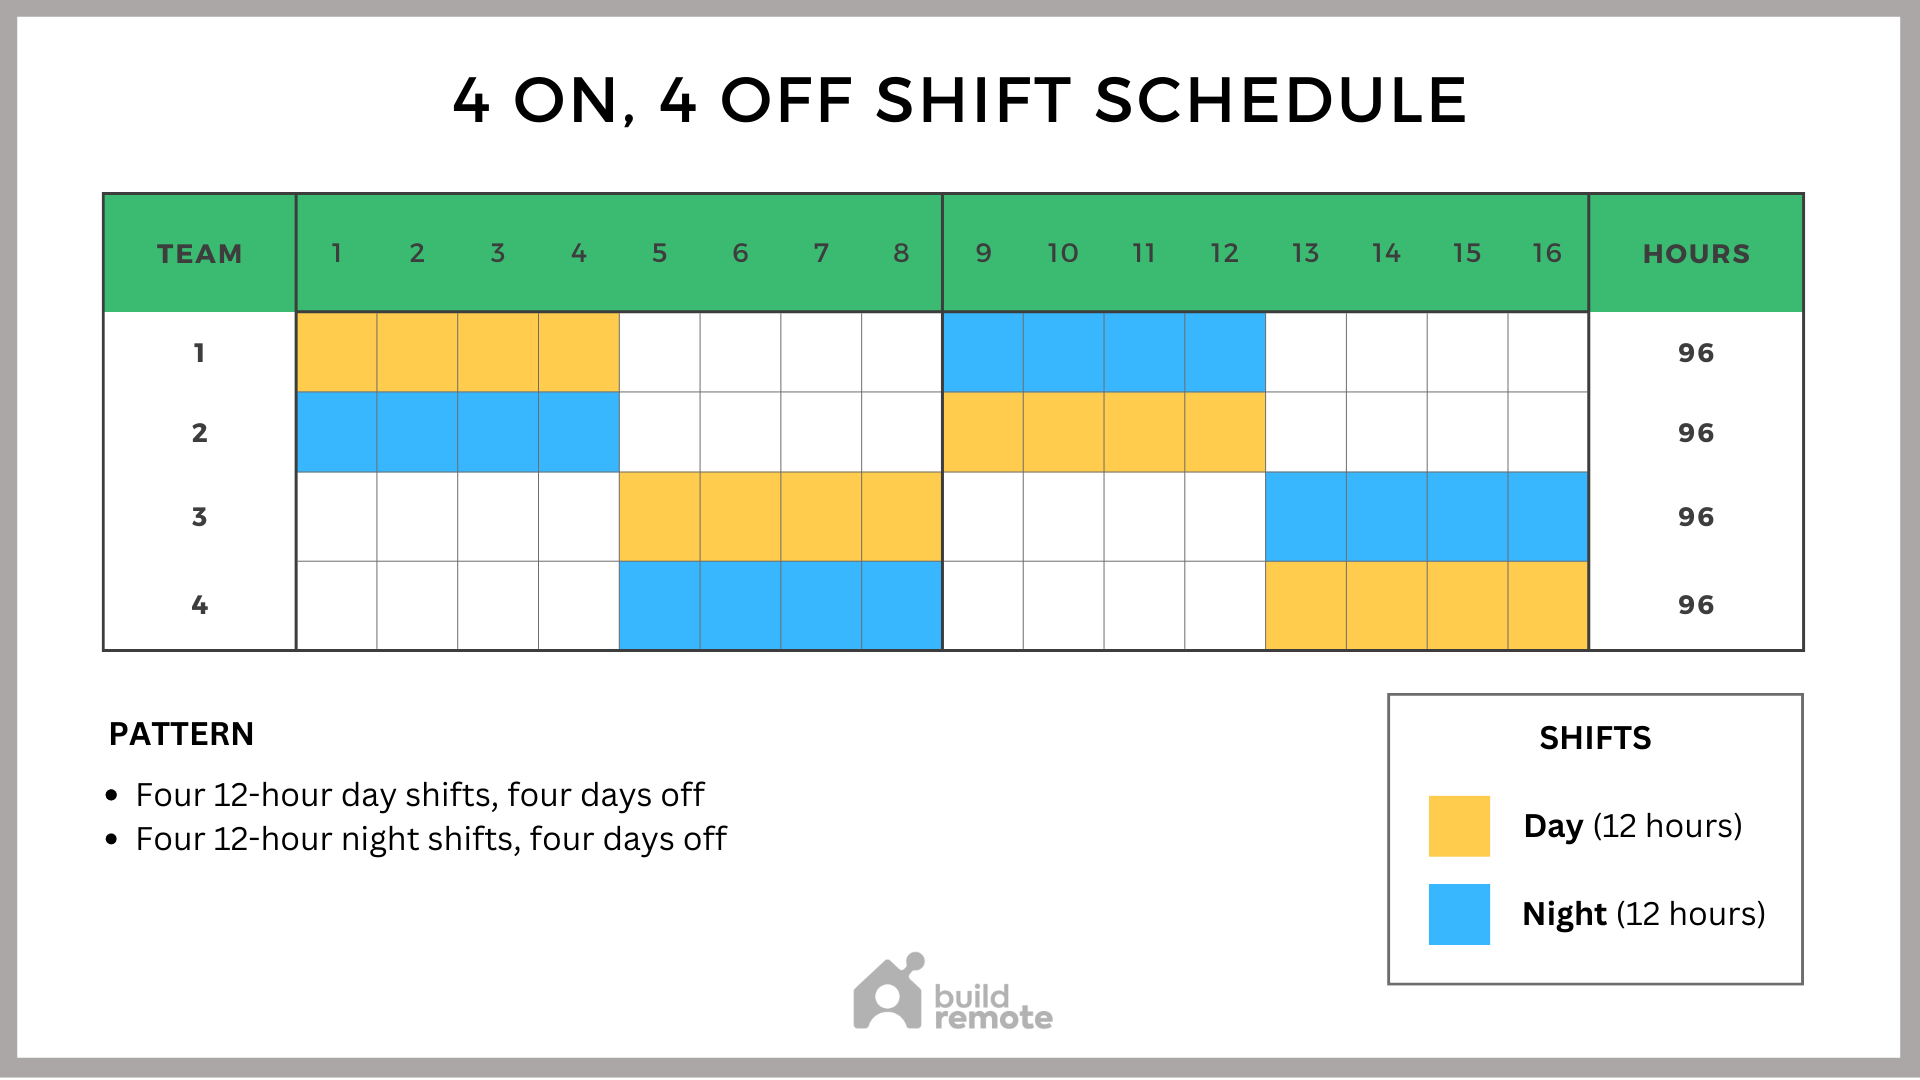 2 2 3 (Panama) Schedule Template (Rotating 12 Hour Shifts) Buildremote